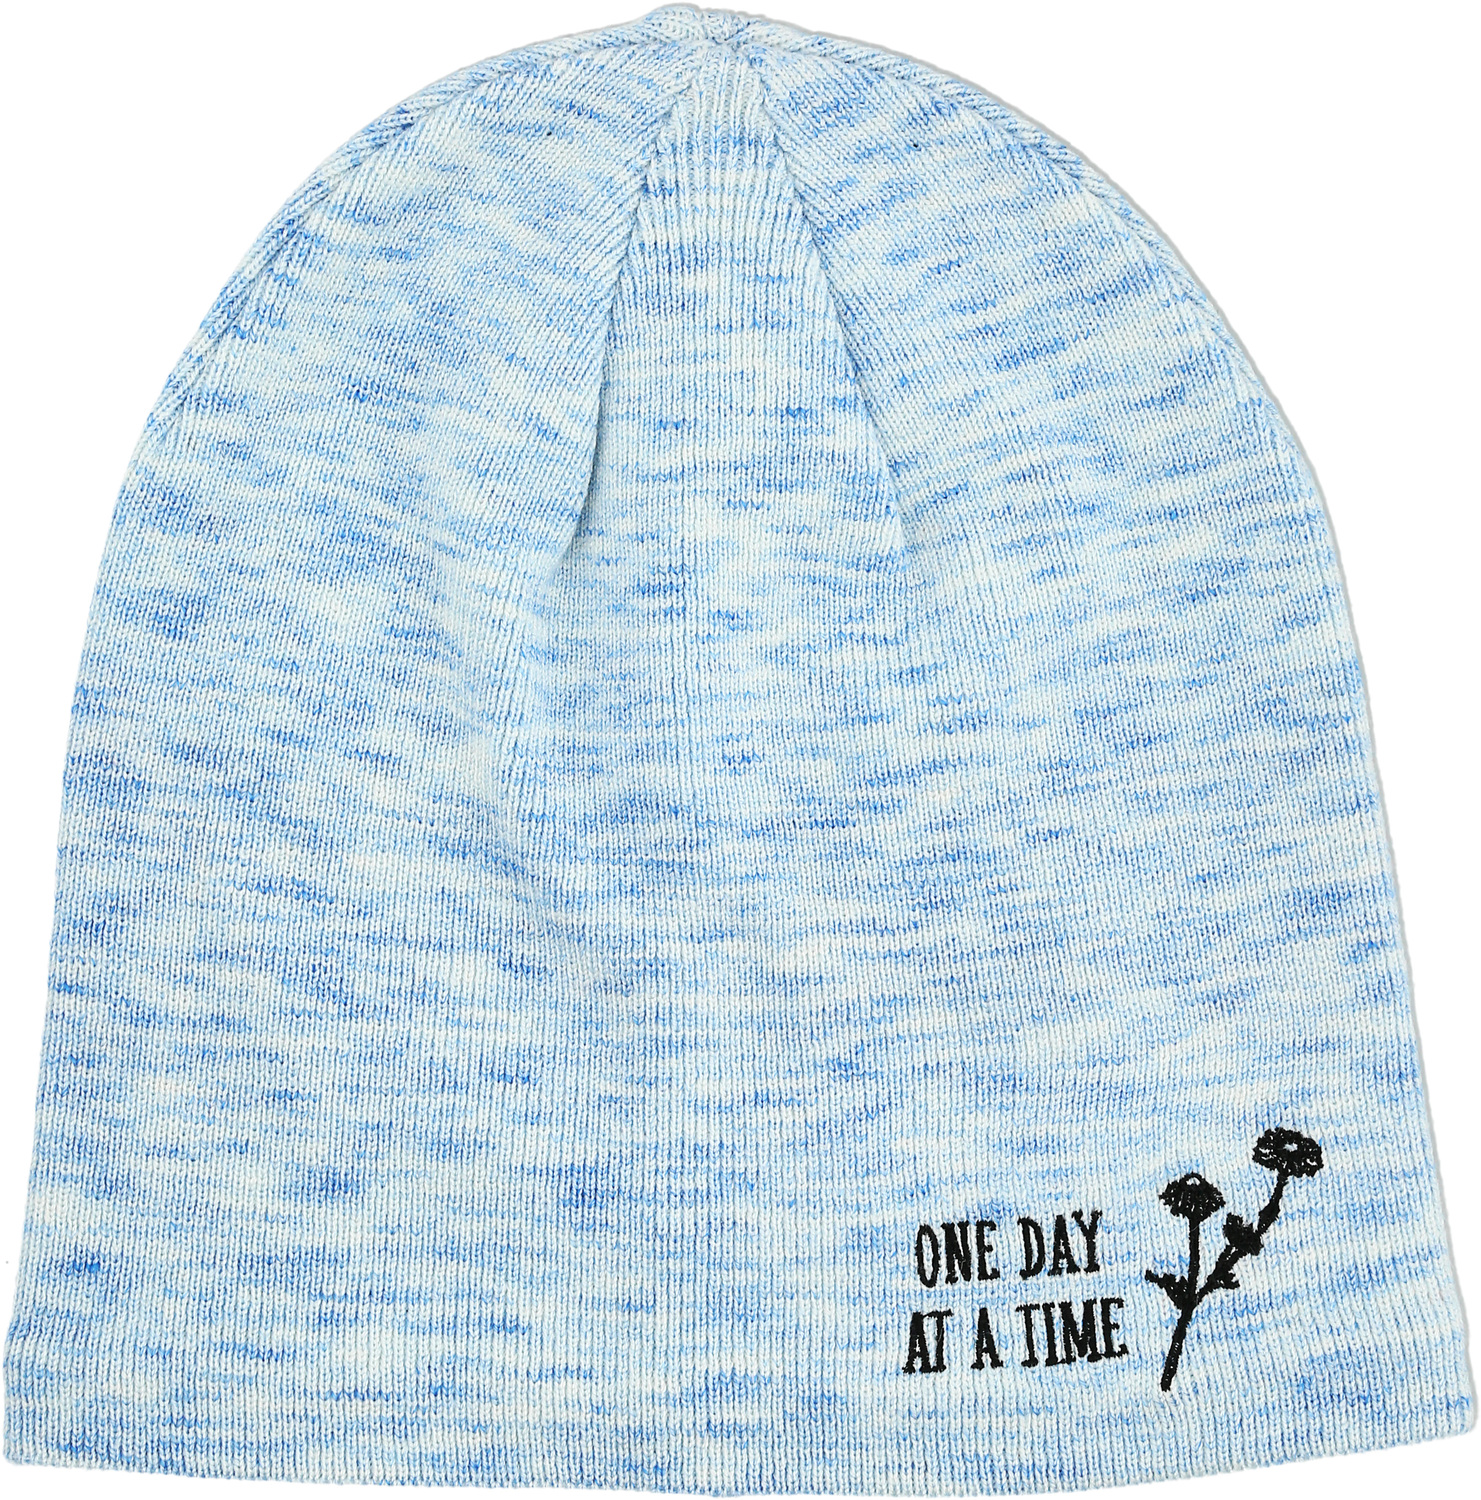 One Day by Faith Hope and Healing - One Day - Women's Soft Cotton Lined Knitted Beanie